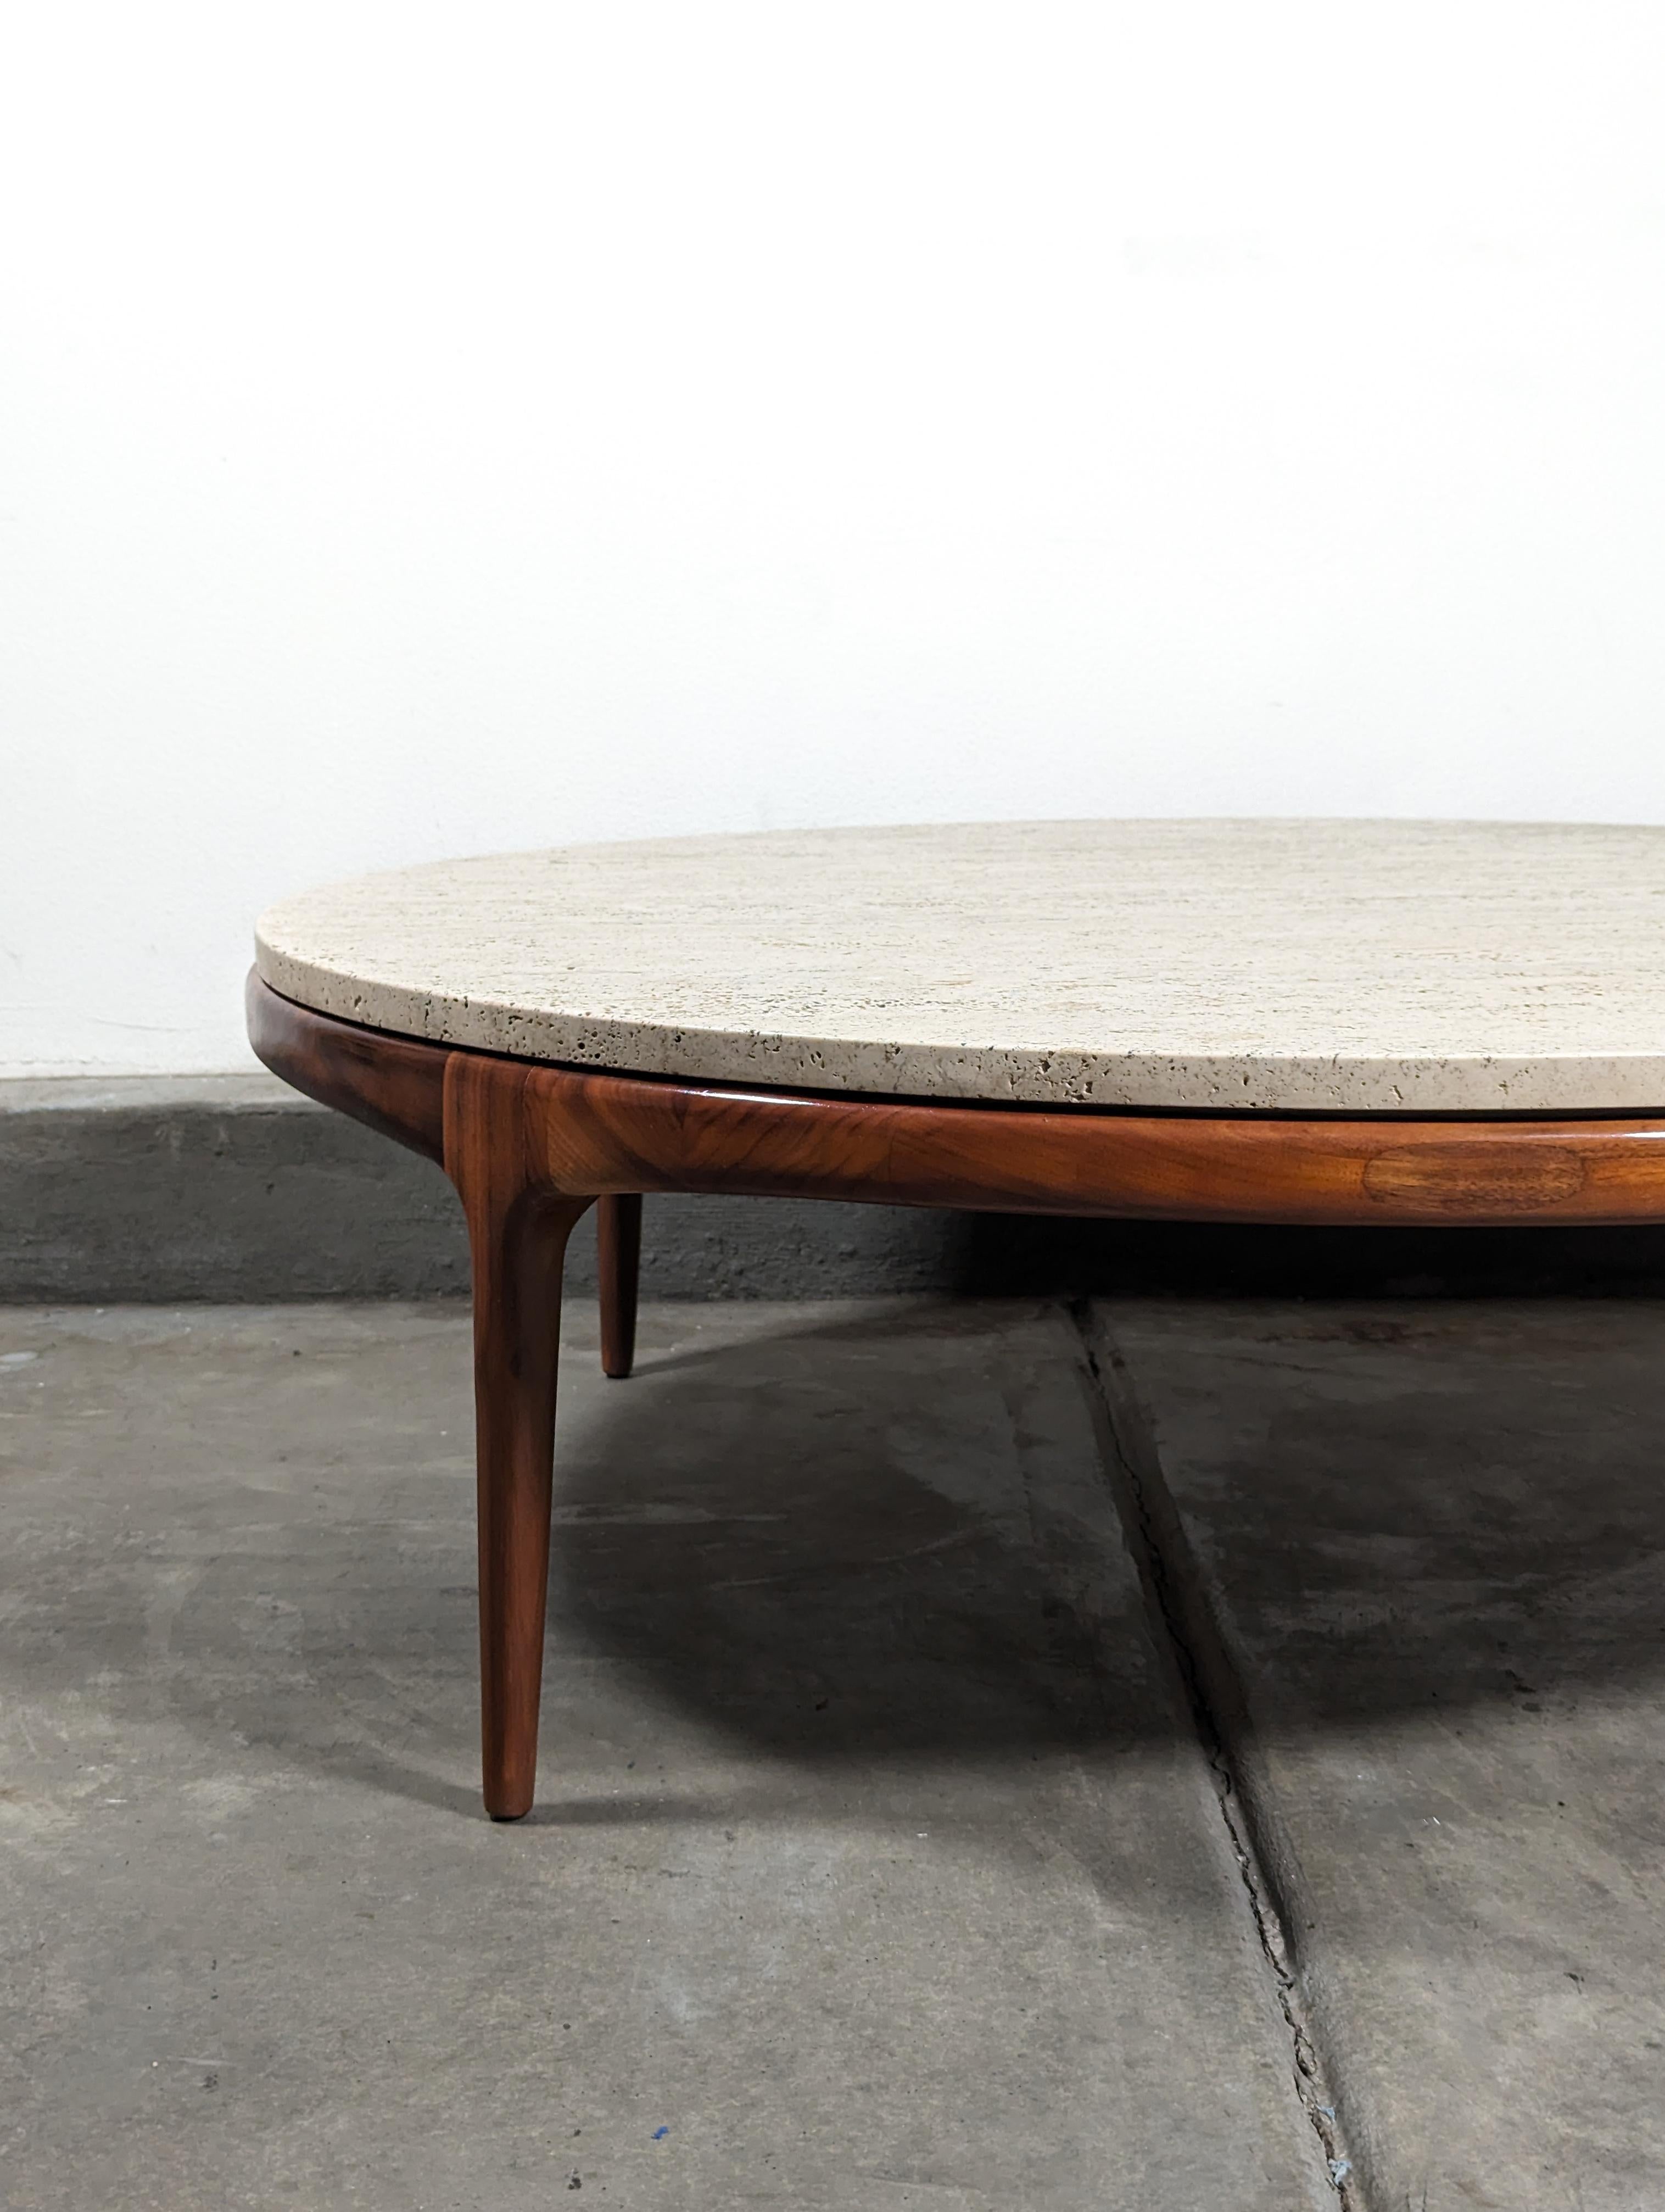 Mid Century Modern Walnut Rythm Coffee Table with Travertine Top by Lane, c1960s For Sale 5